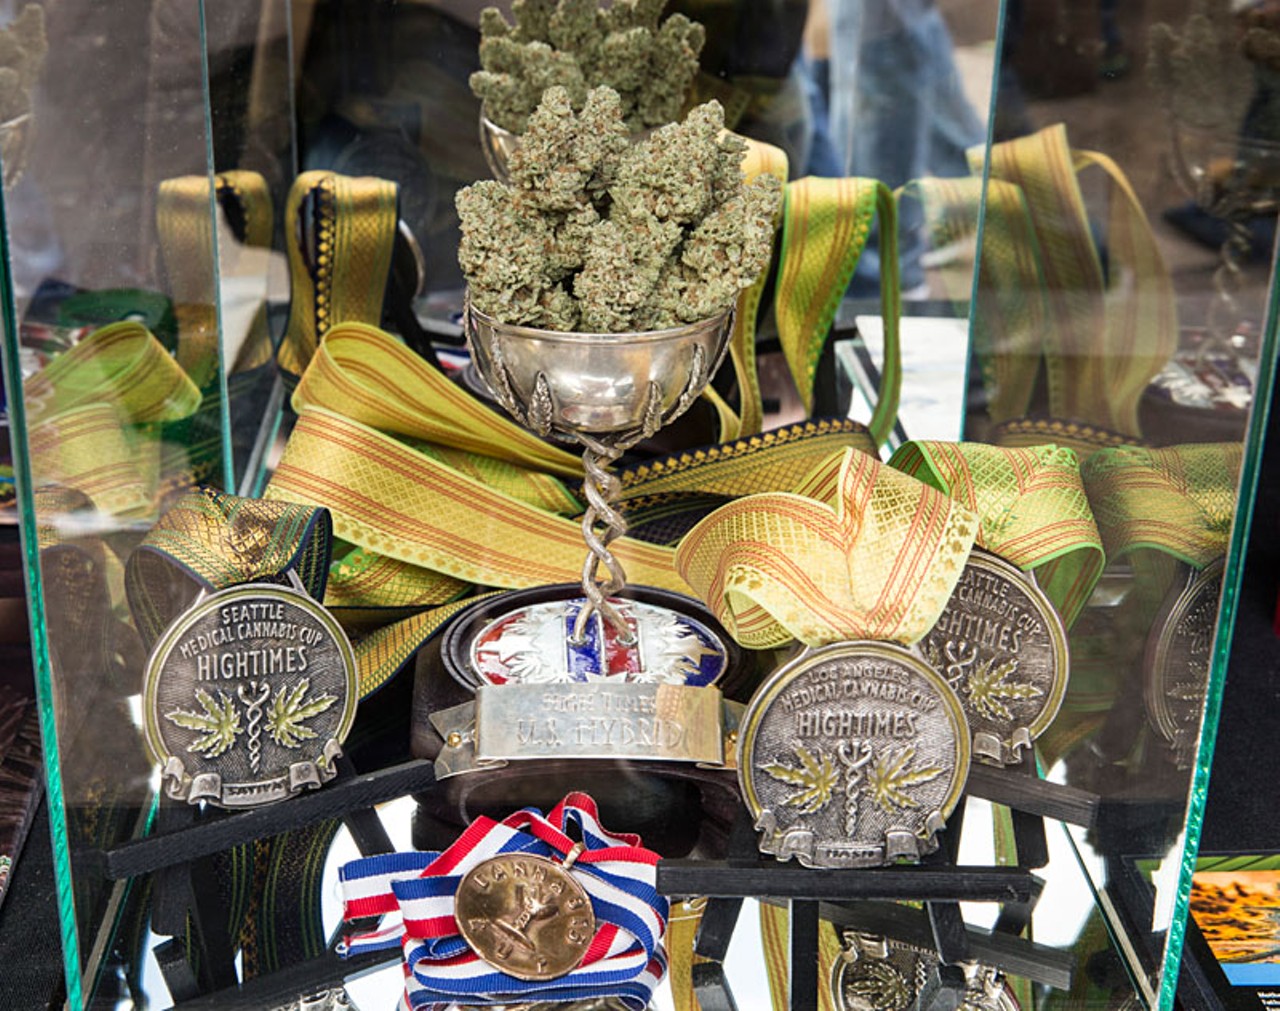 The Cannabis Cup Award at the Exogenetix stand.